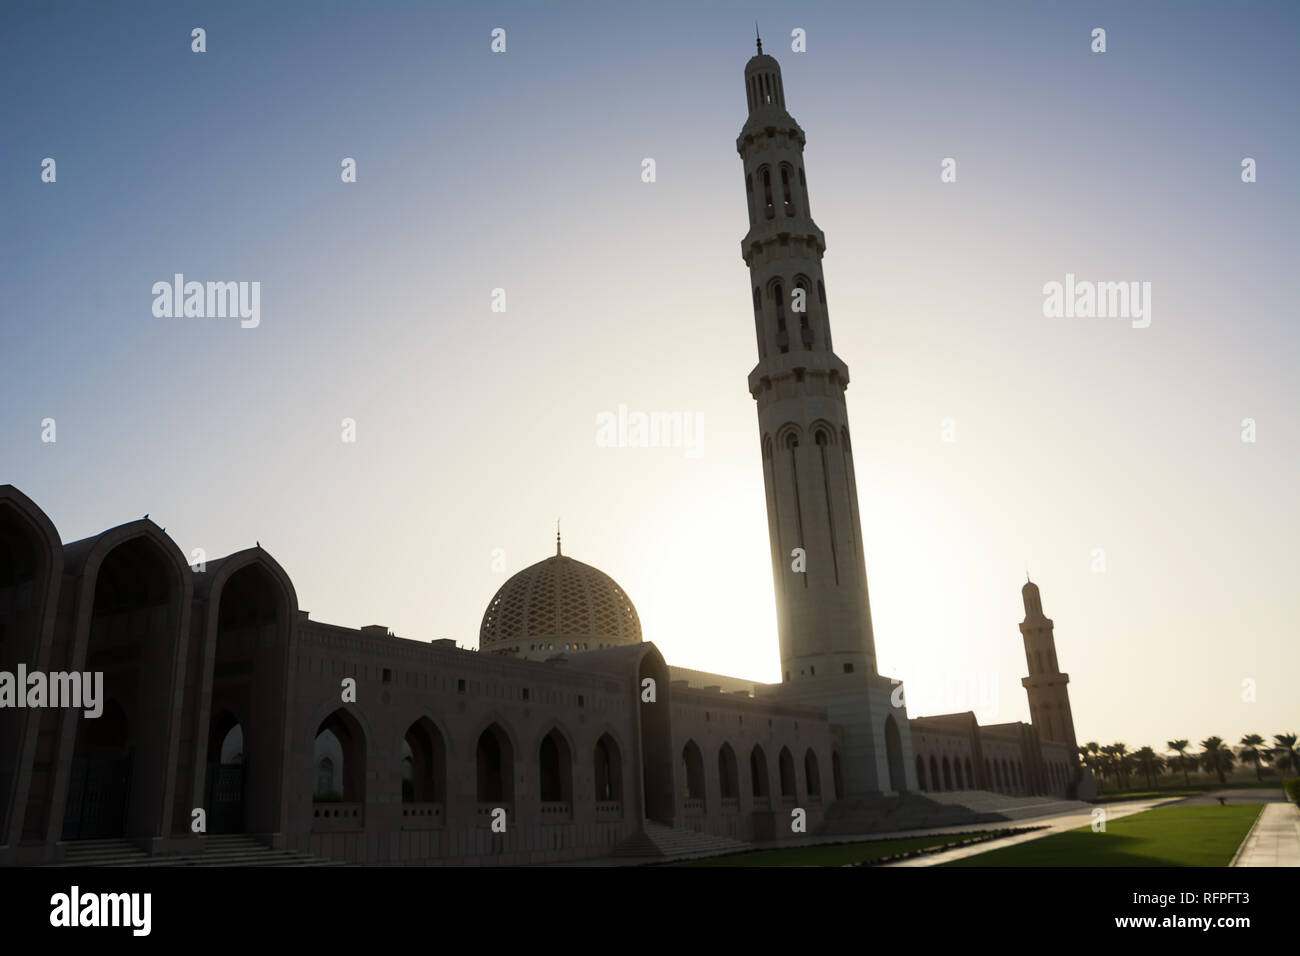 Silhouettes of the Sultan Qaboos Grand Mosque in Muscat (Oman) Stock Photo